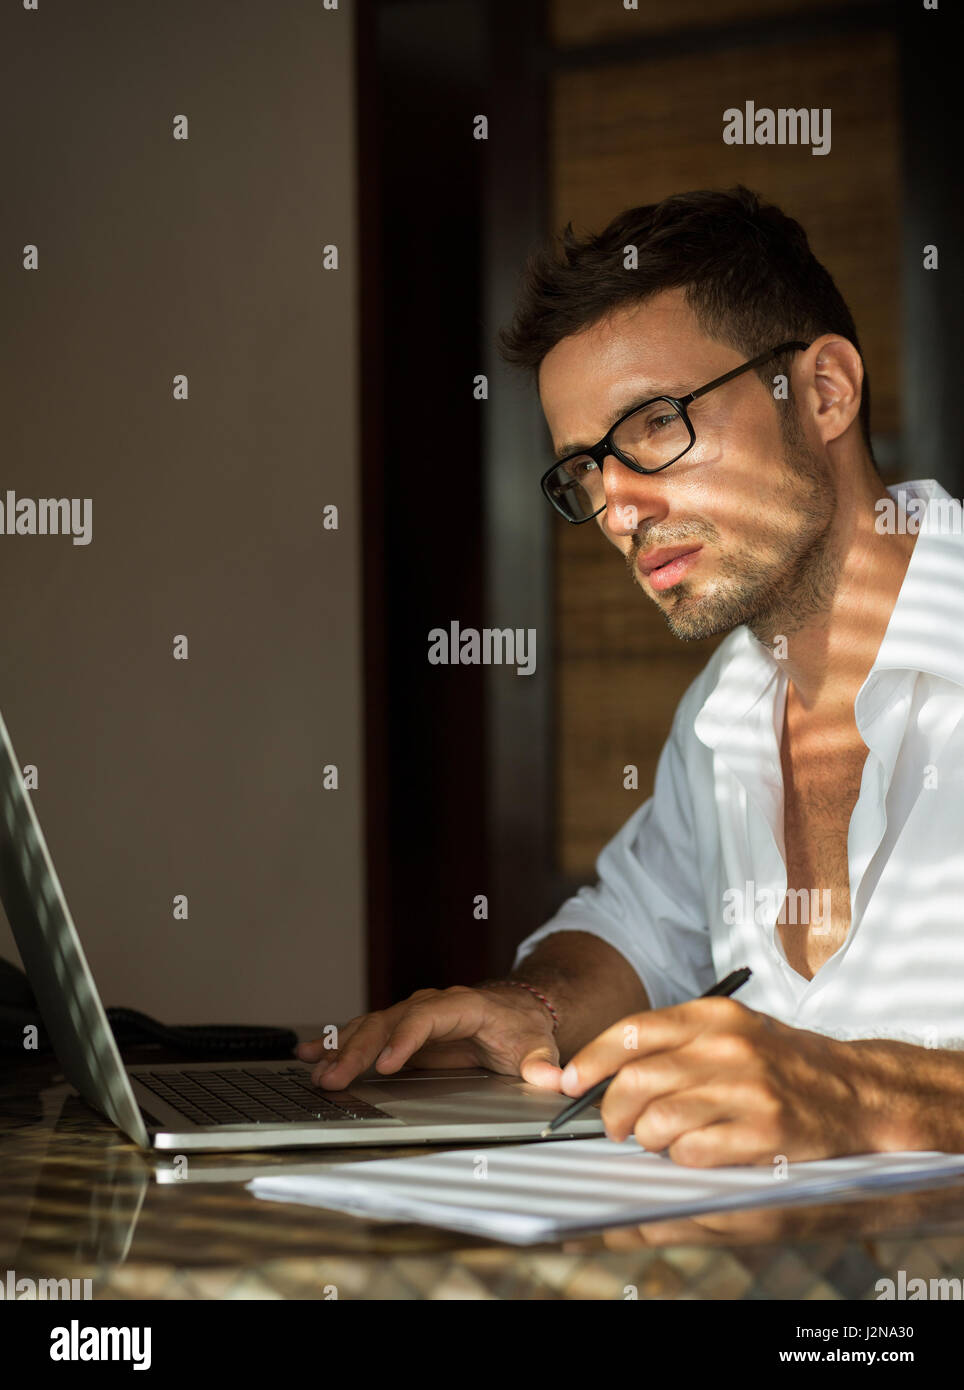 Good-look men sitting front laptop and thinking with shadows of daylights Stock Photo